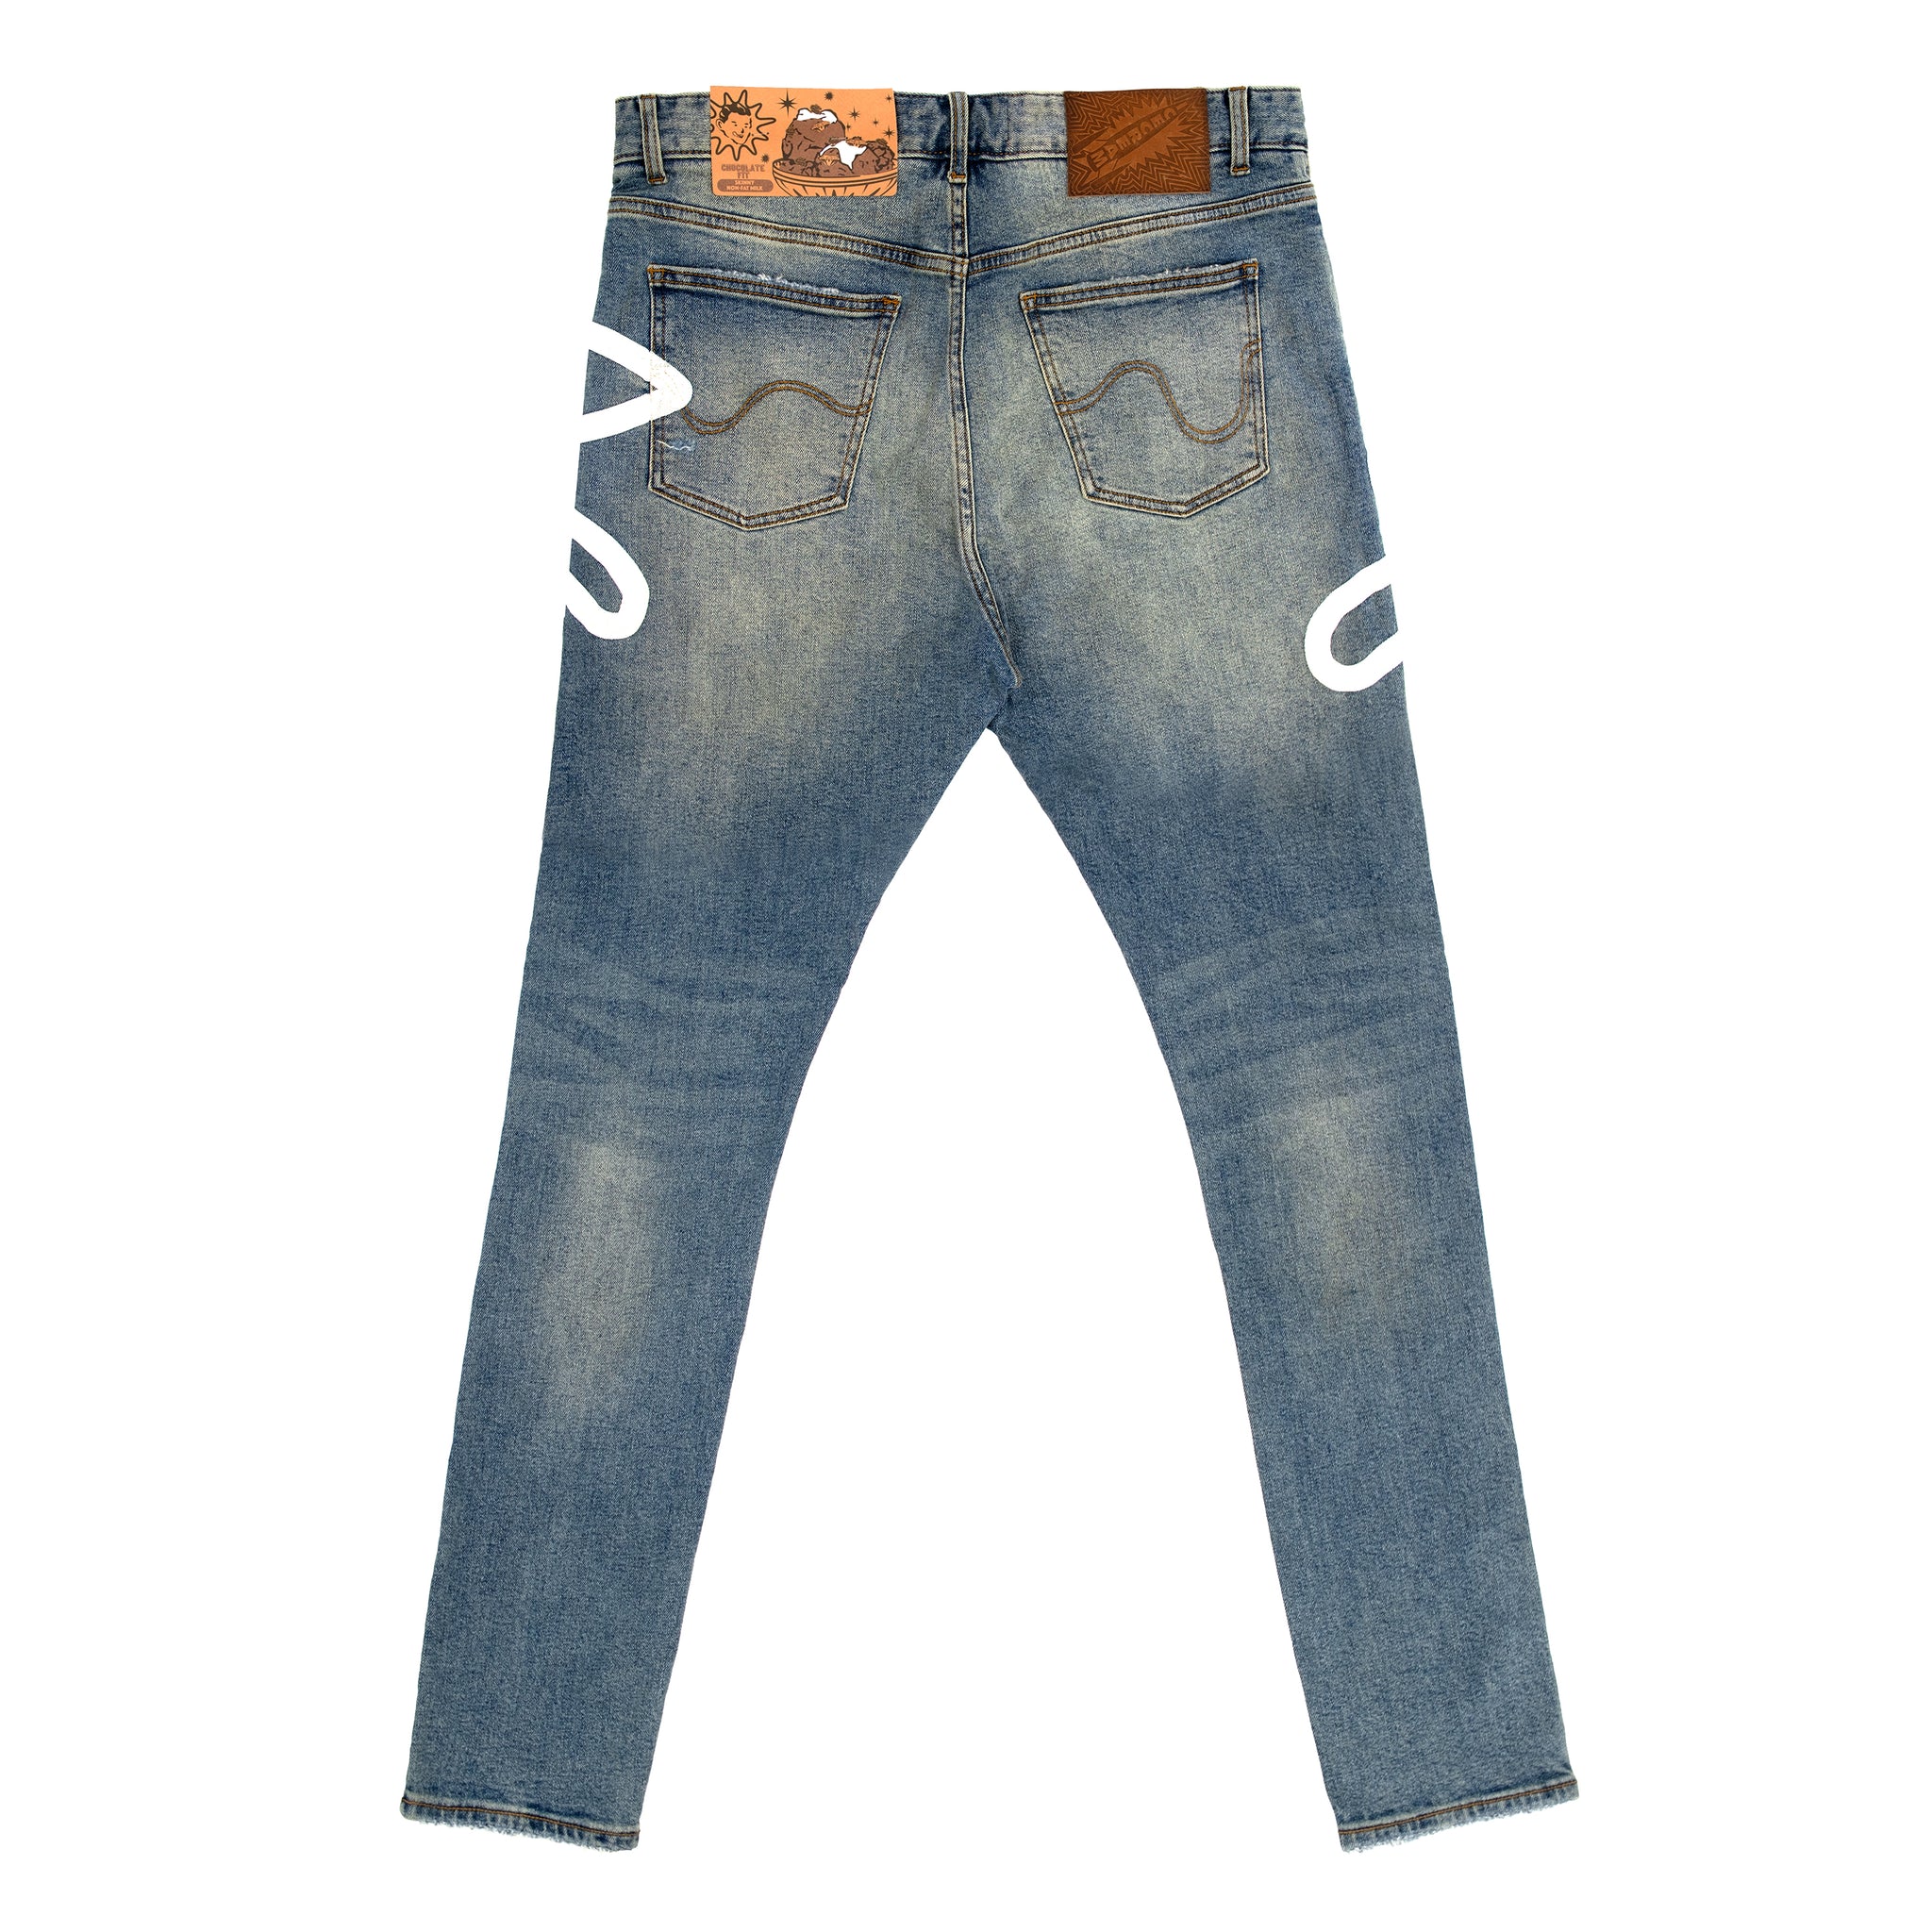 SUPERSIZE JEAN (CHOCOLATE FIT) - BLUEBERRY